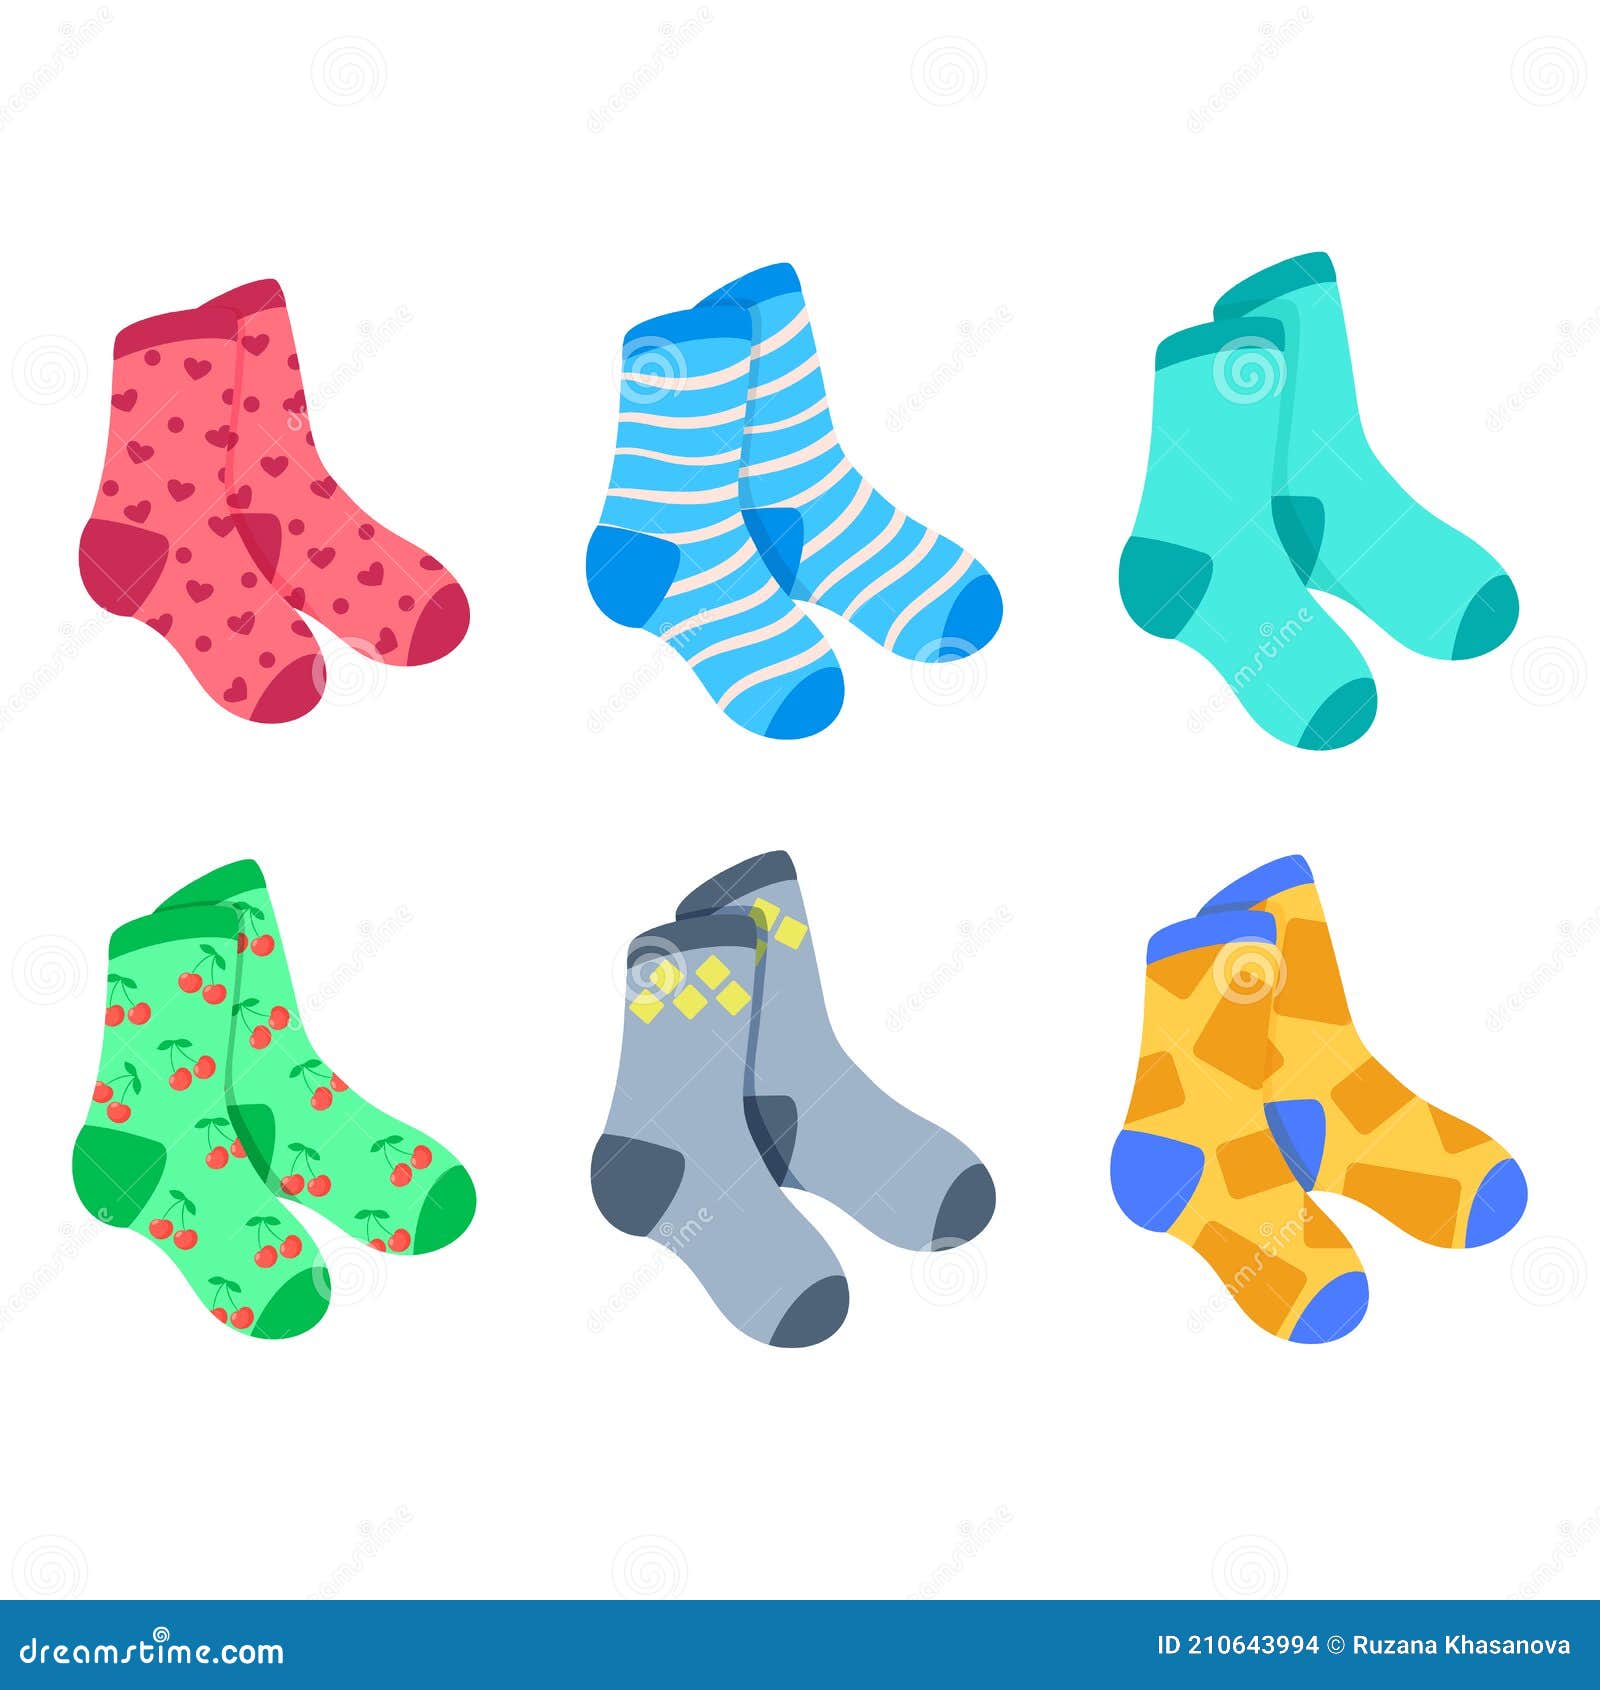 Premium Vector  Set of socks pattern. illustrations isolate sock with  colored pattern